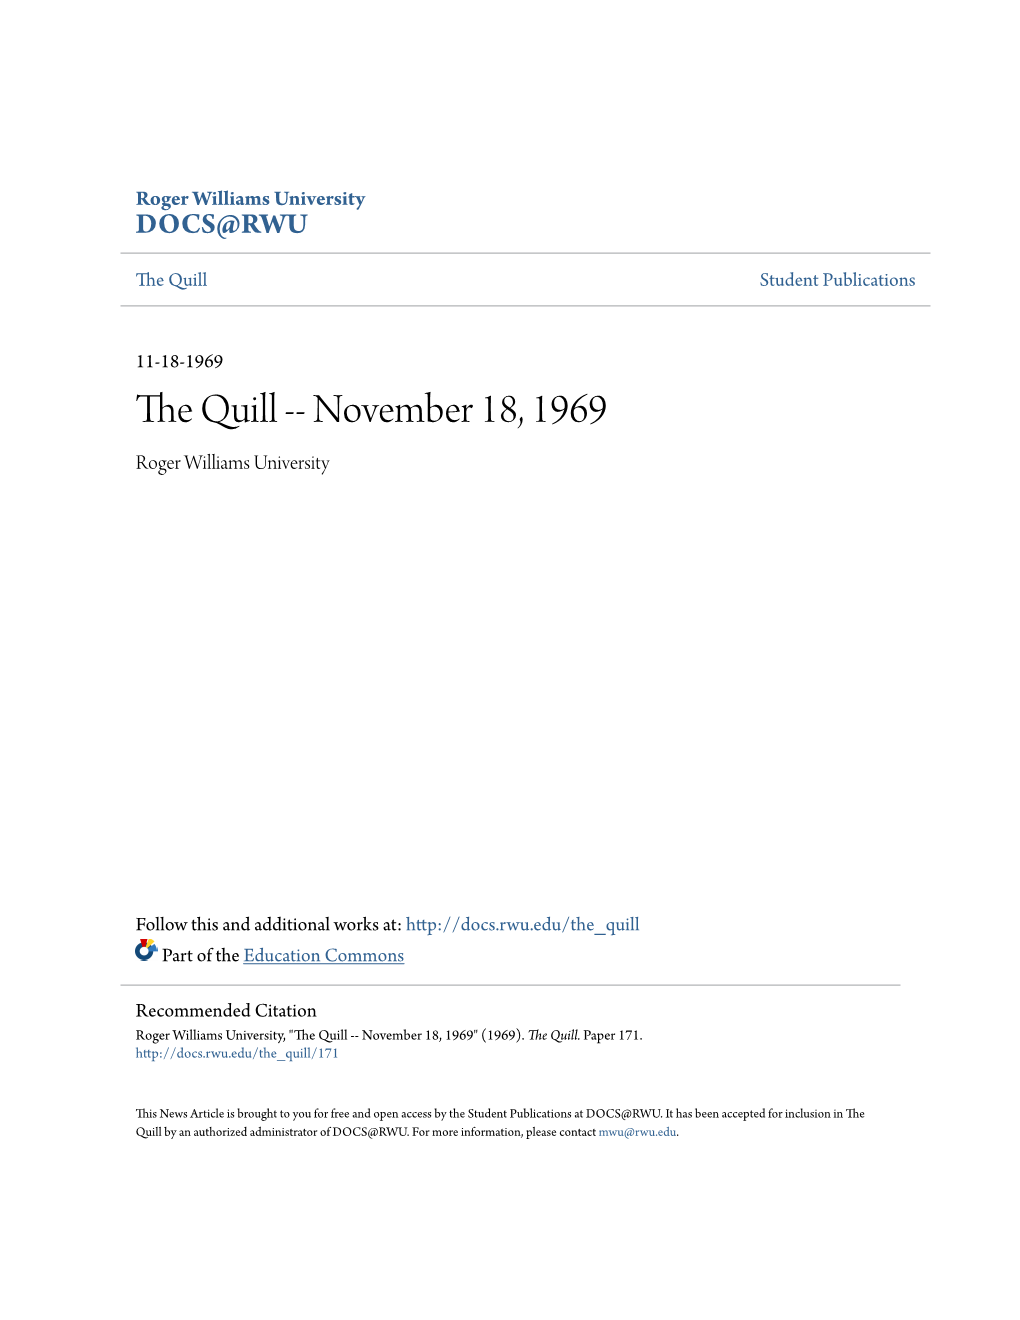 The Quill -- November 18, 1969 Roger Williams University